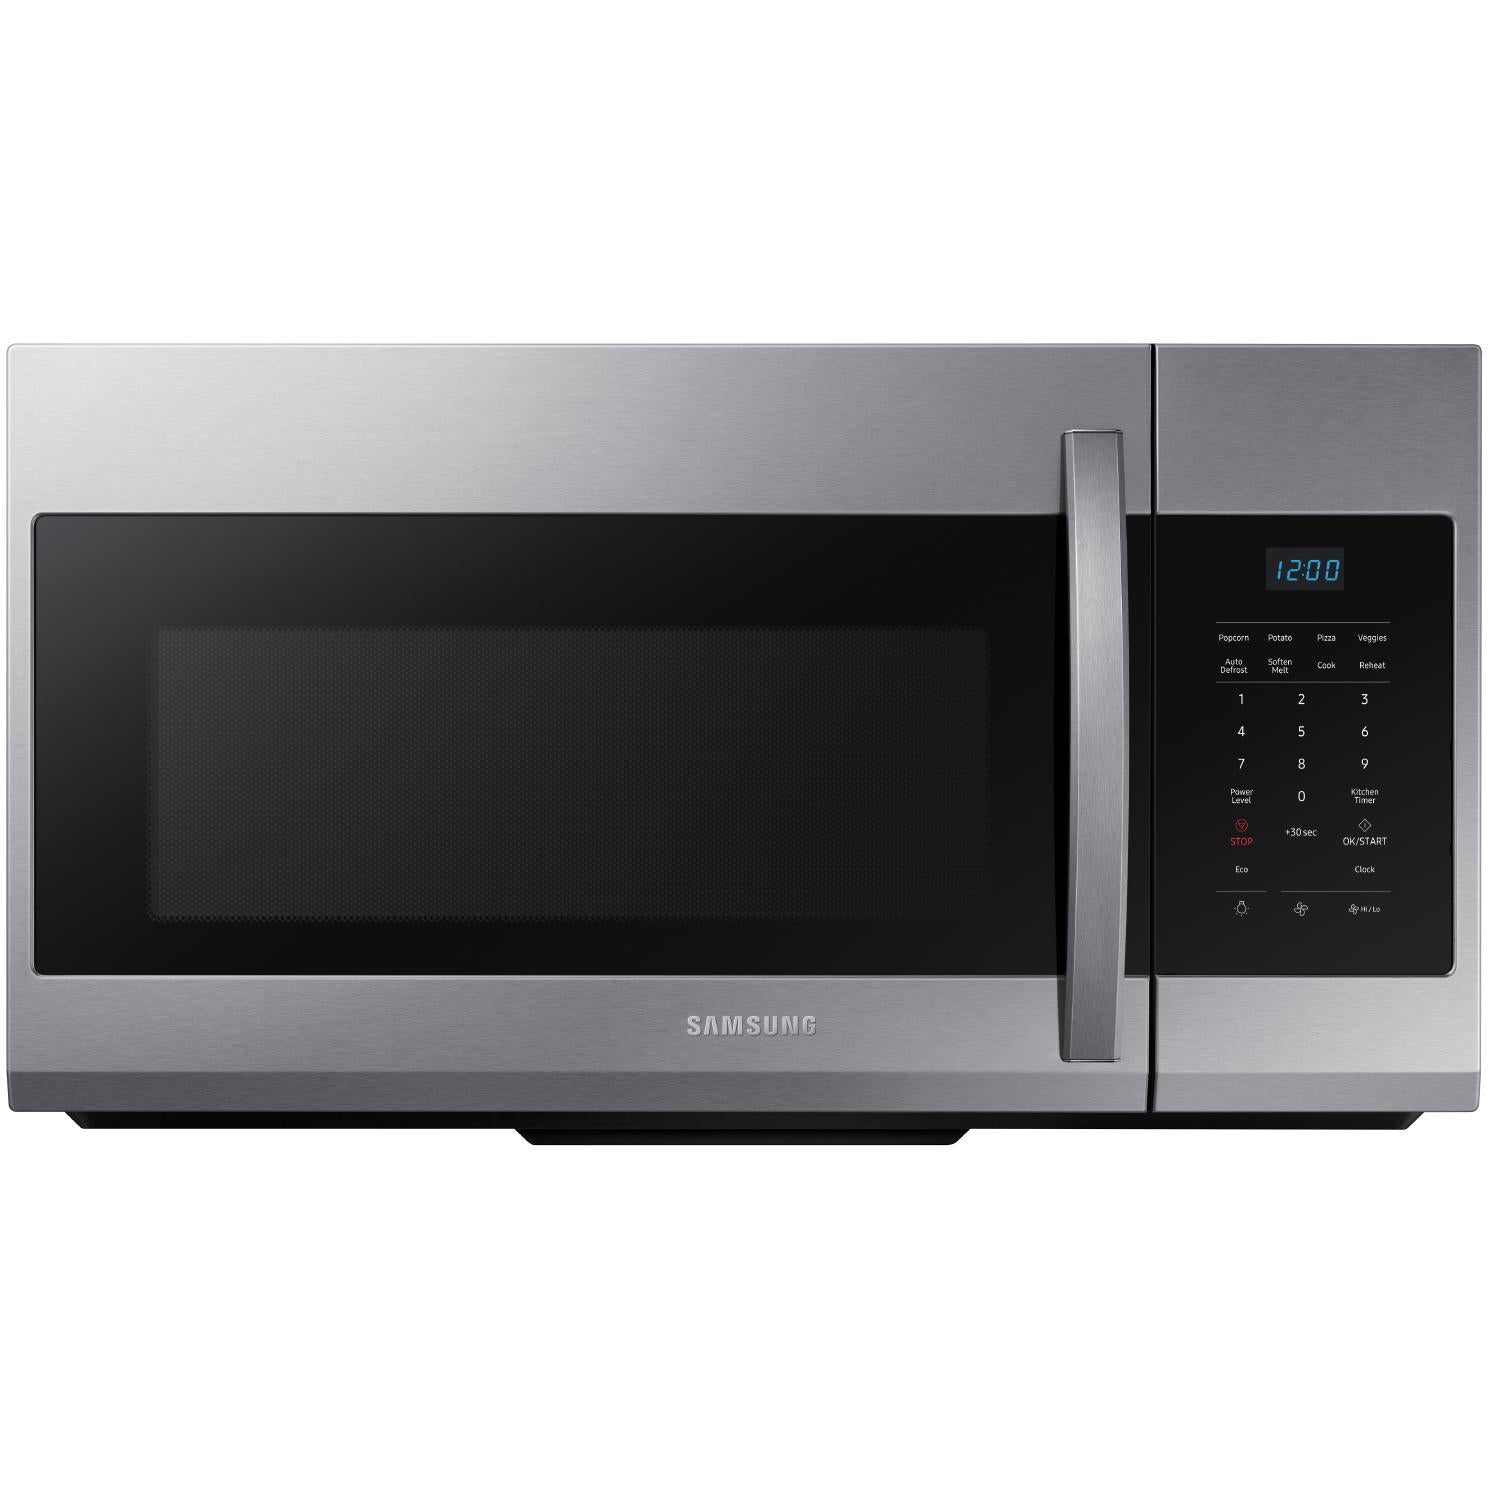 Samsung 30-inch, 1.7 cu.ft. Over-the-Range Microwave Oven with LED Display ME17R7021ES/AA